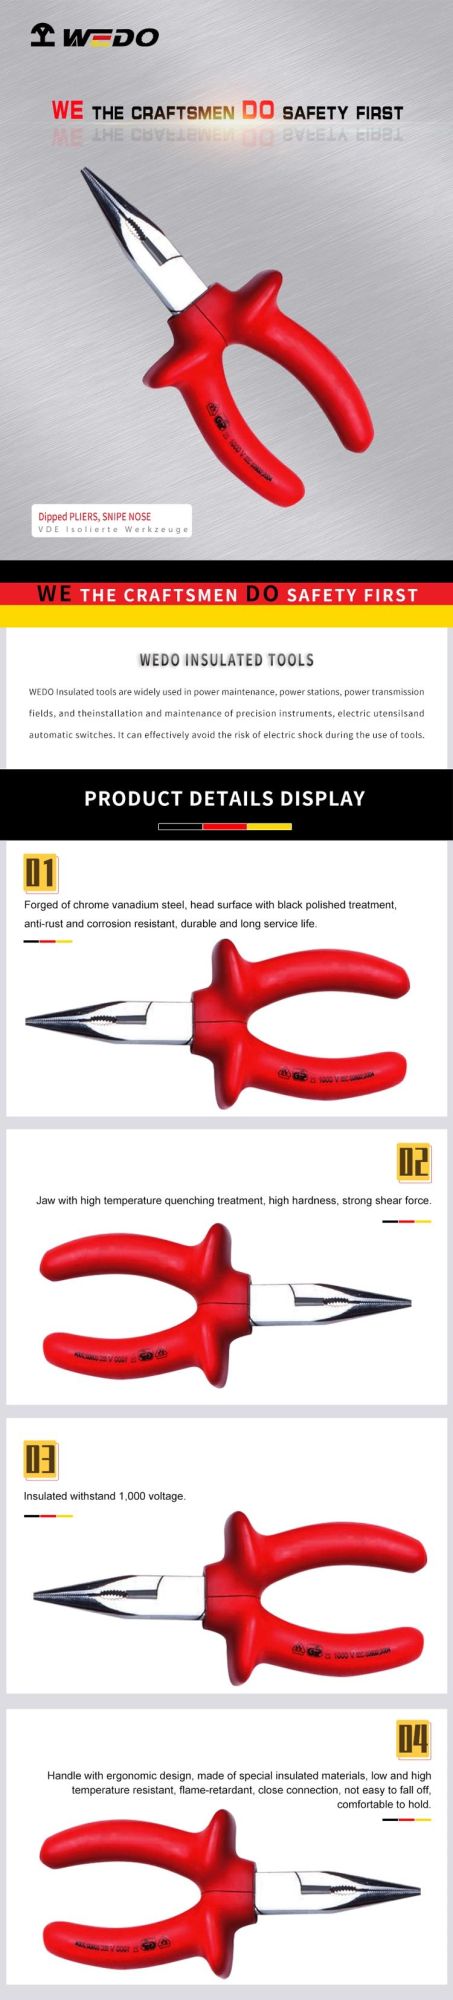 Wedo High Quality Insulated Snipe Nose Dipped Pliers